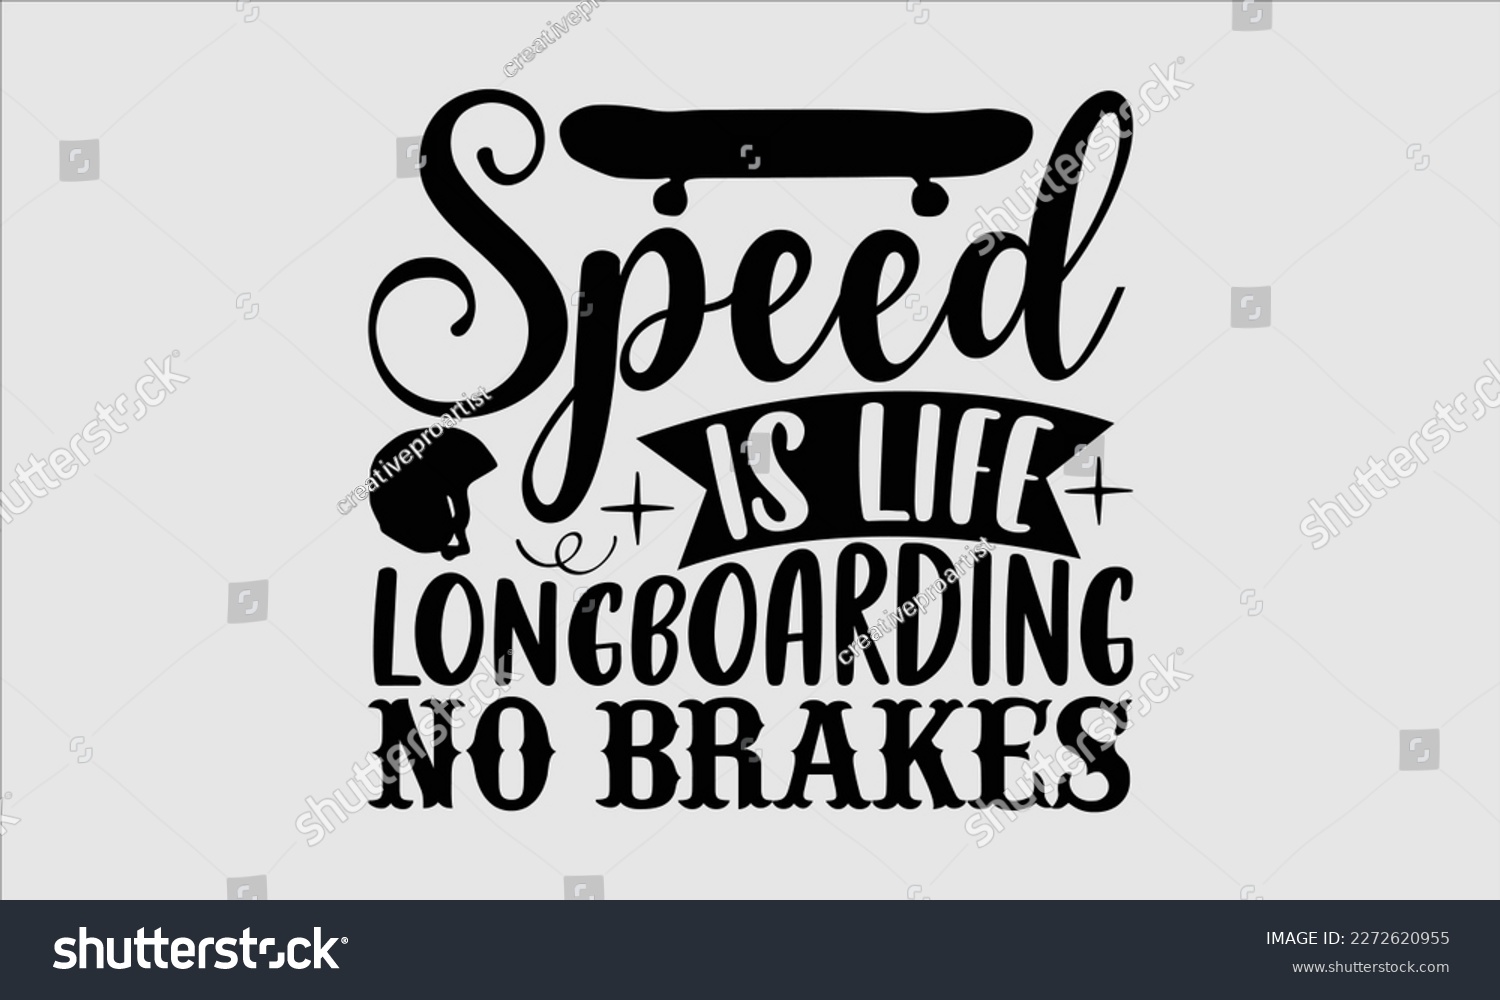 SVG of Speed is life longboarding no brakes- Longboarding T- shirt Design, Hand drawn lettering phrase, Illustration for prints on t-shirts and bags, posters, funny eps files, svg cricut svg